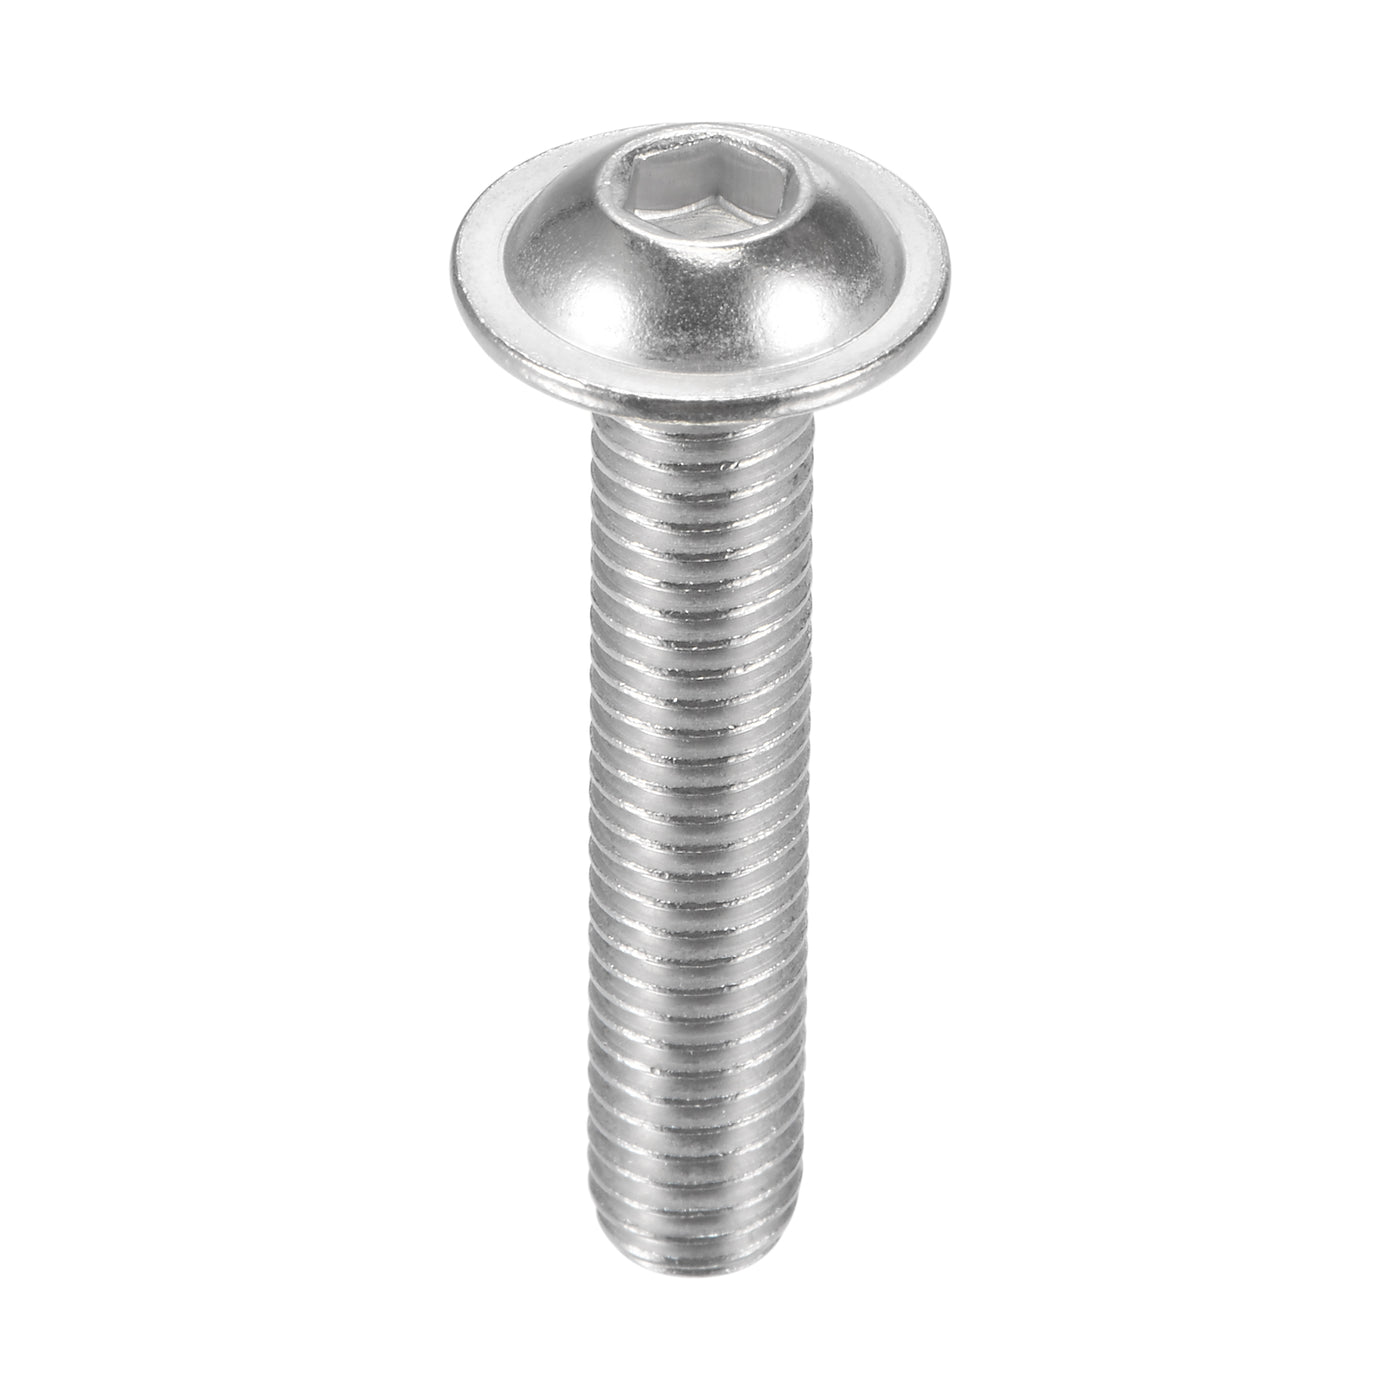 Uxcell Uxcell M8x16mm 304 Stainless Steel Flanged Button Head Socket Cap Screws 20pcs